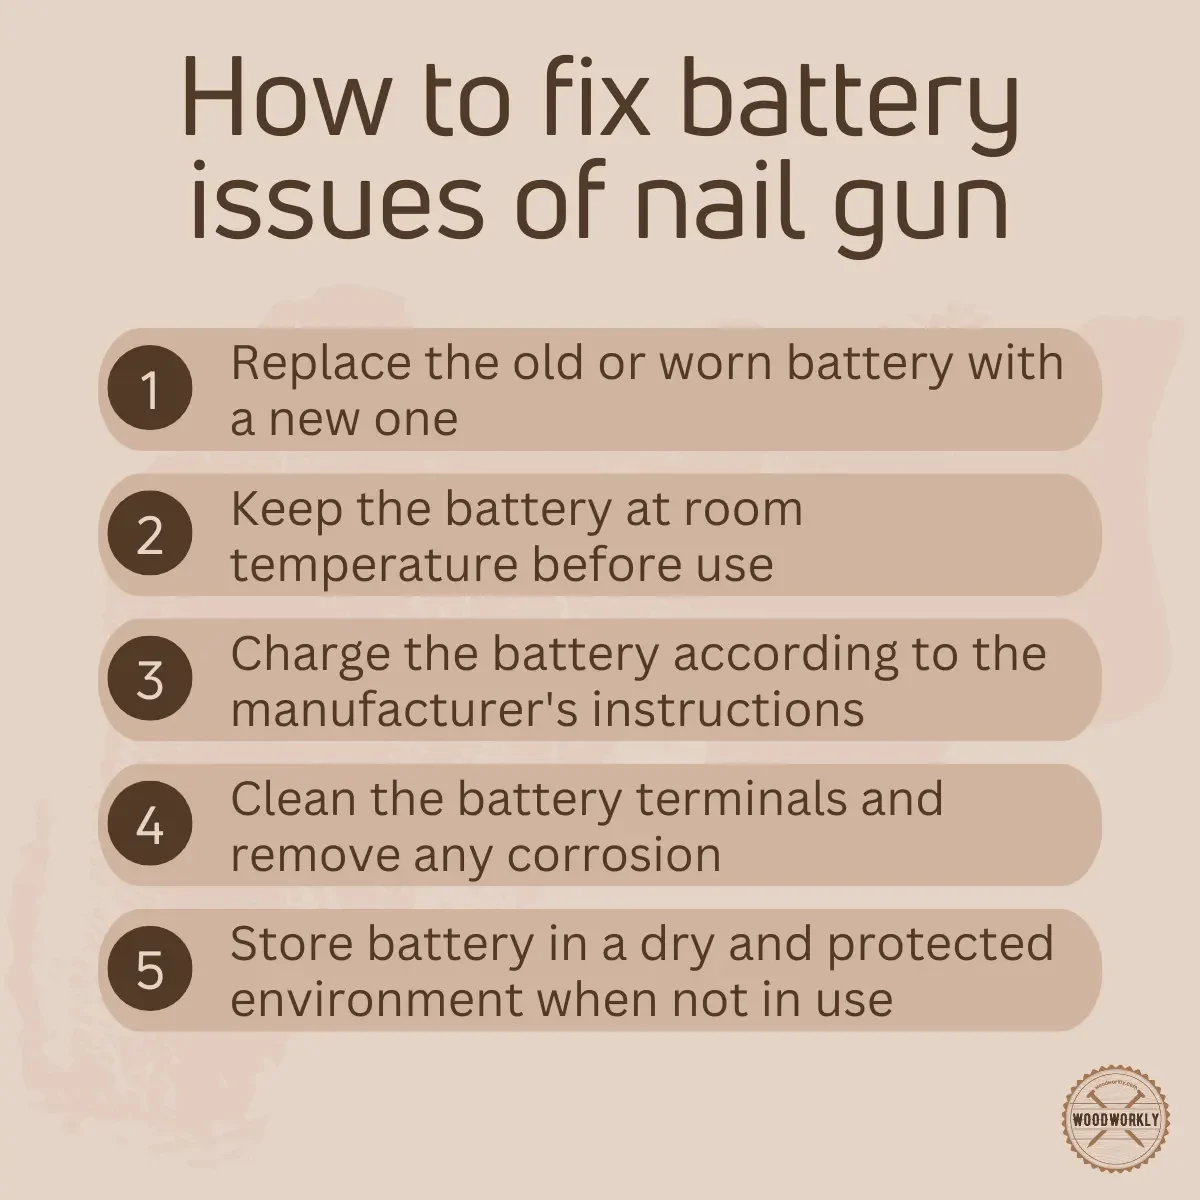 How to fix battery issues of nail gun